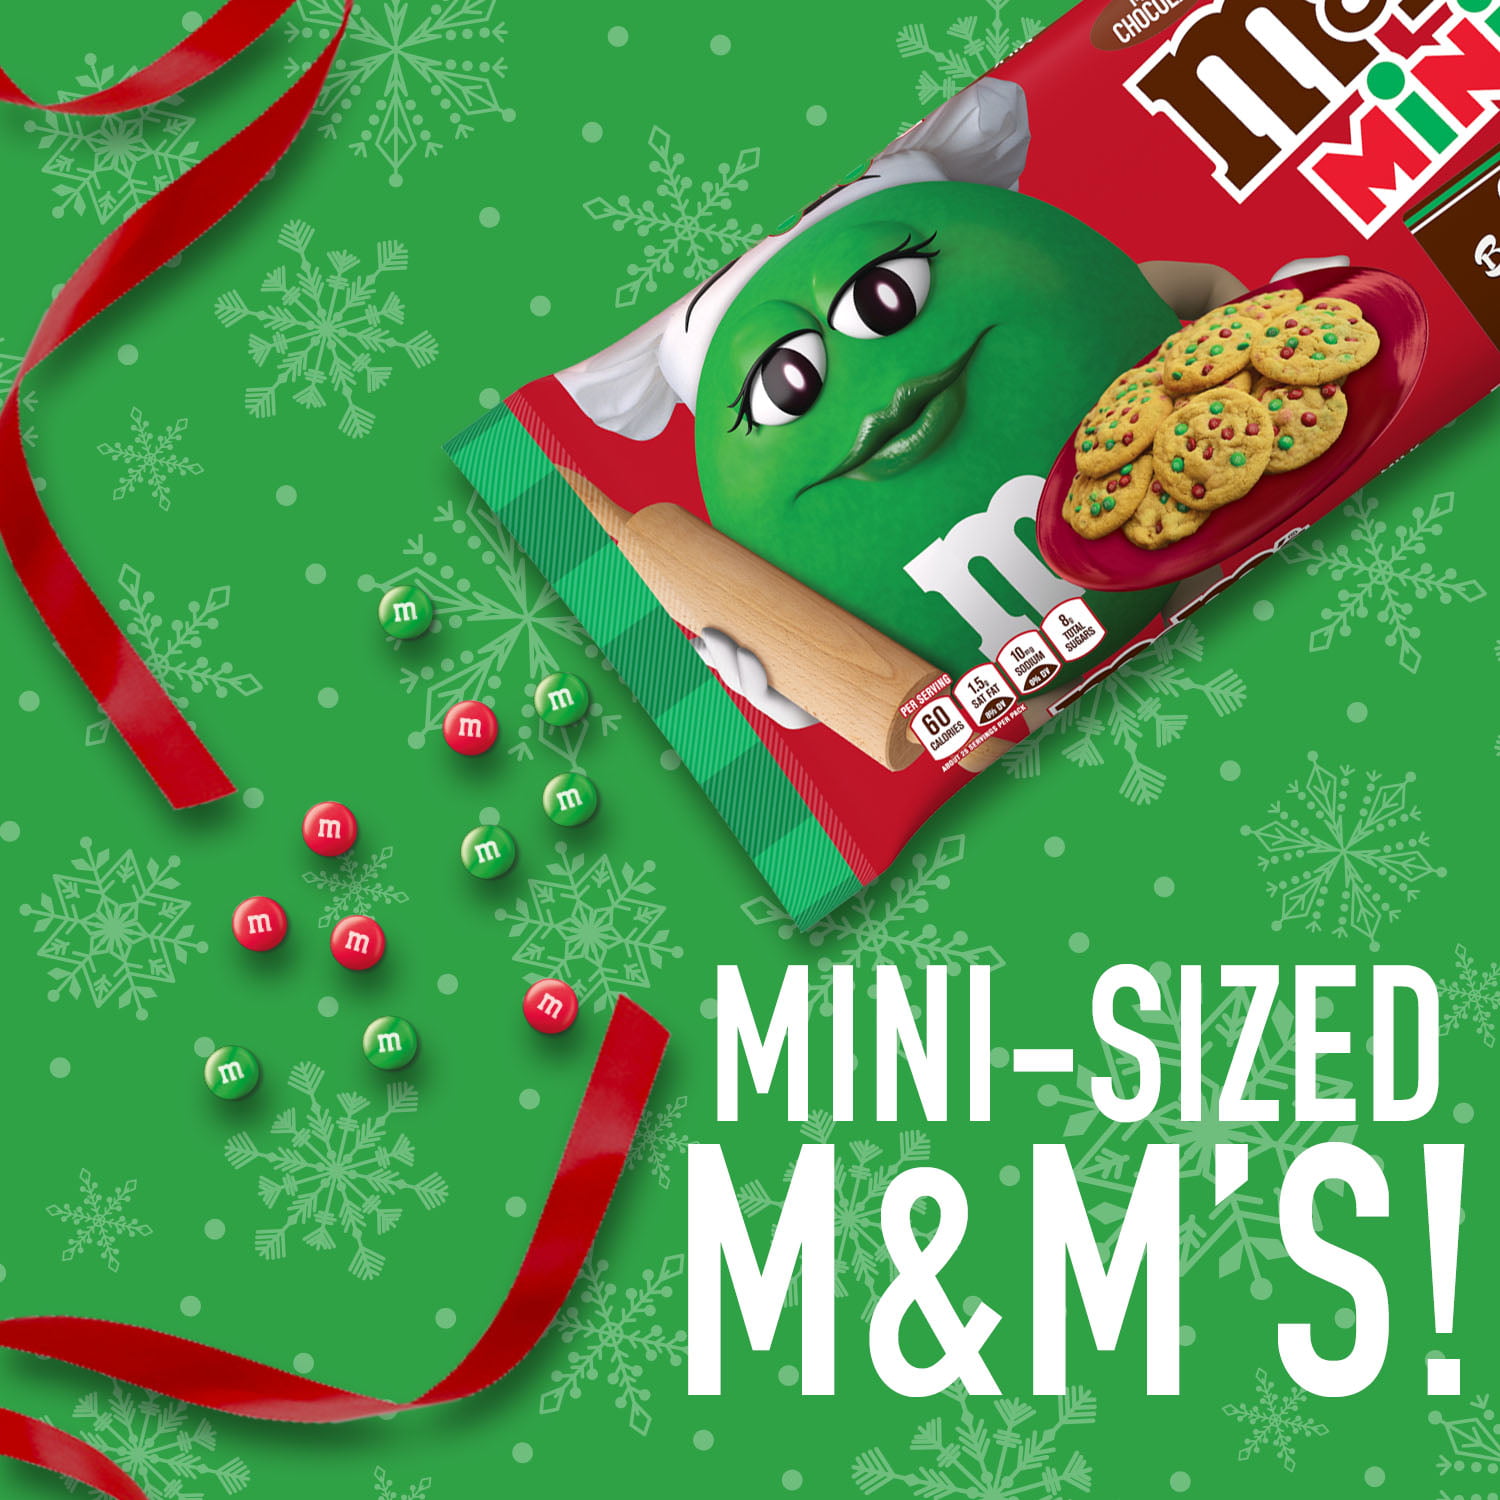 M&M's Minis Milk Chocolate Christmas Candy, Sharing Size - 10.1